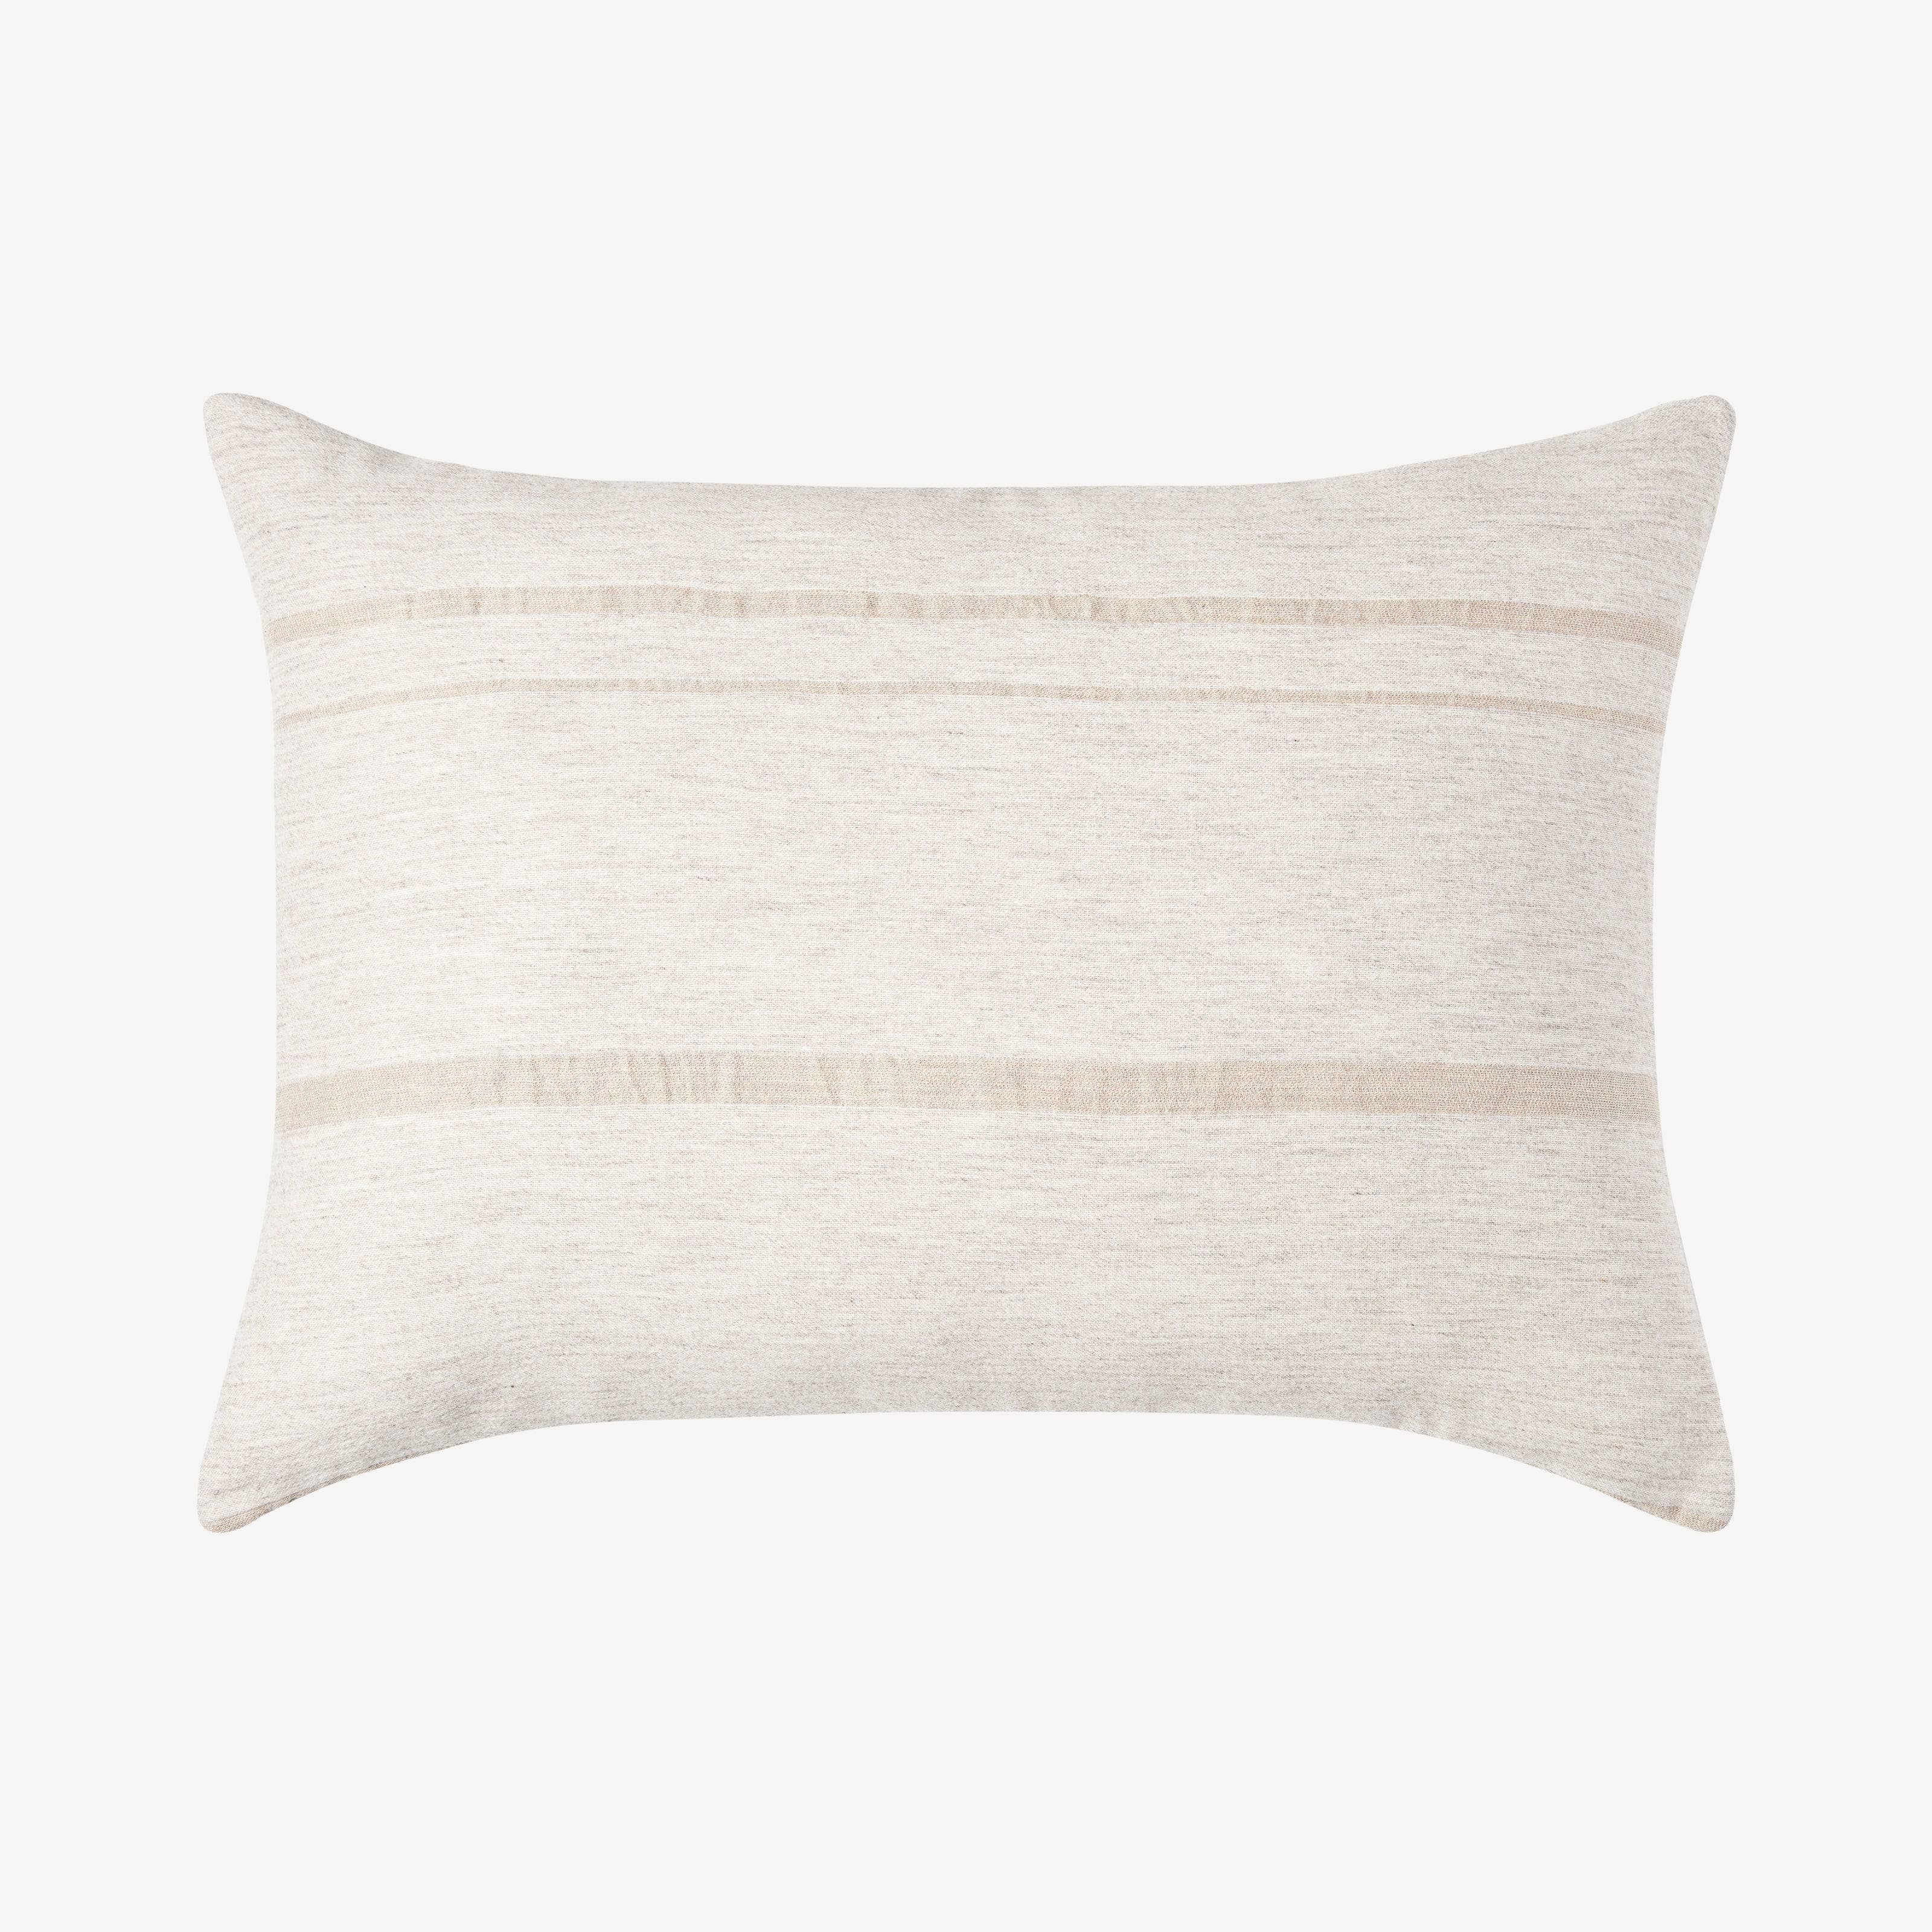 Andreo Cushion Cover, Grey - Beige, 40x60cm 1